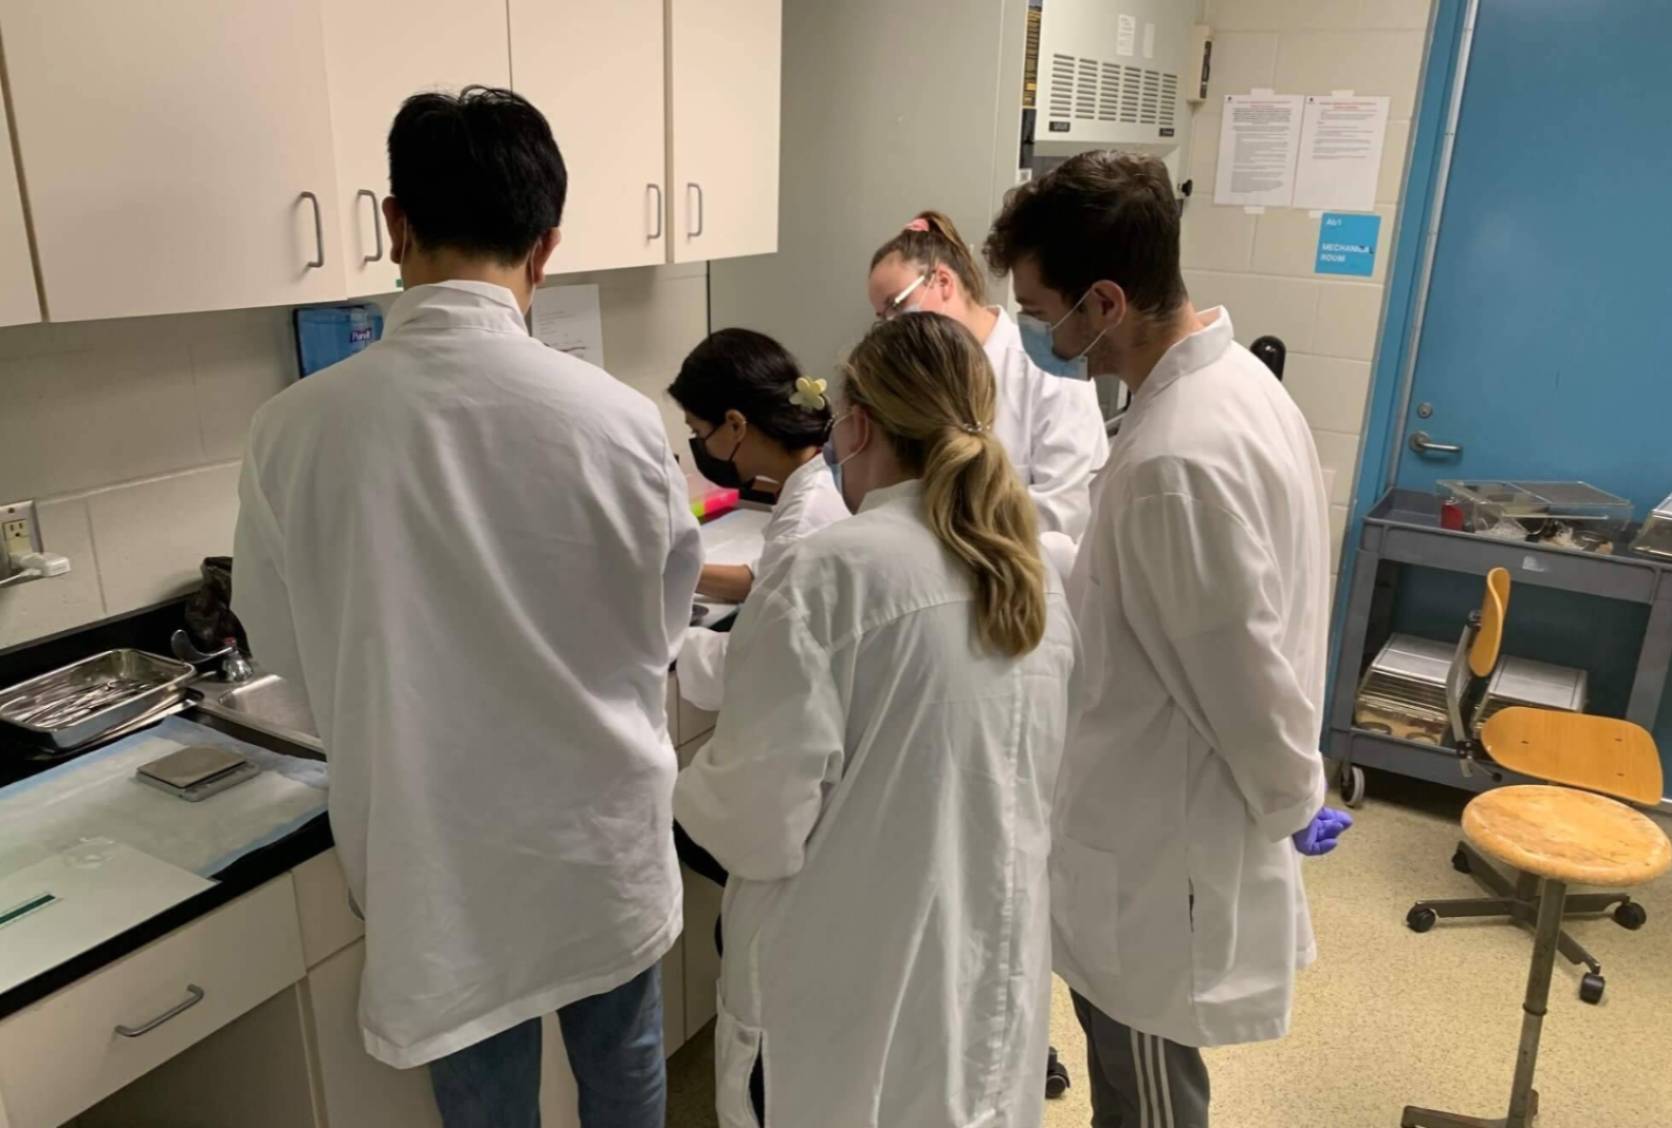 PhD students in lab coats